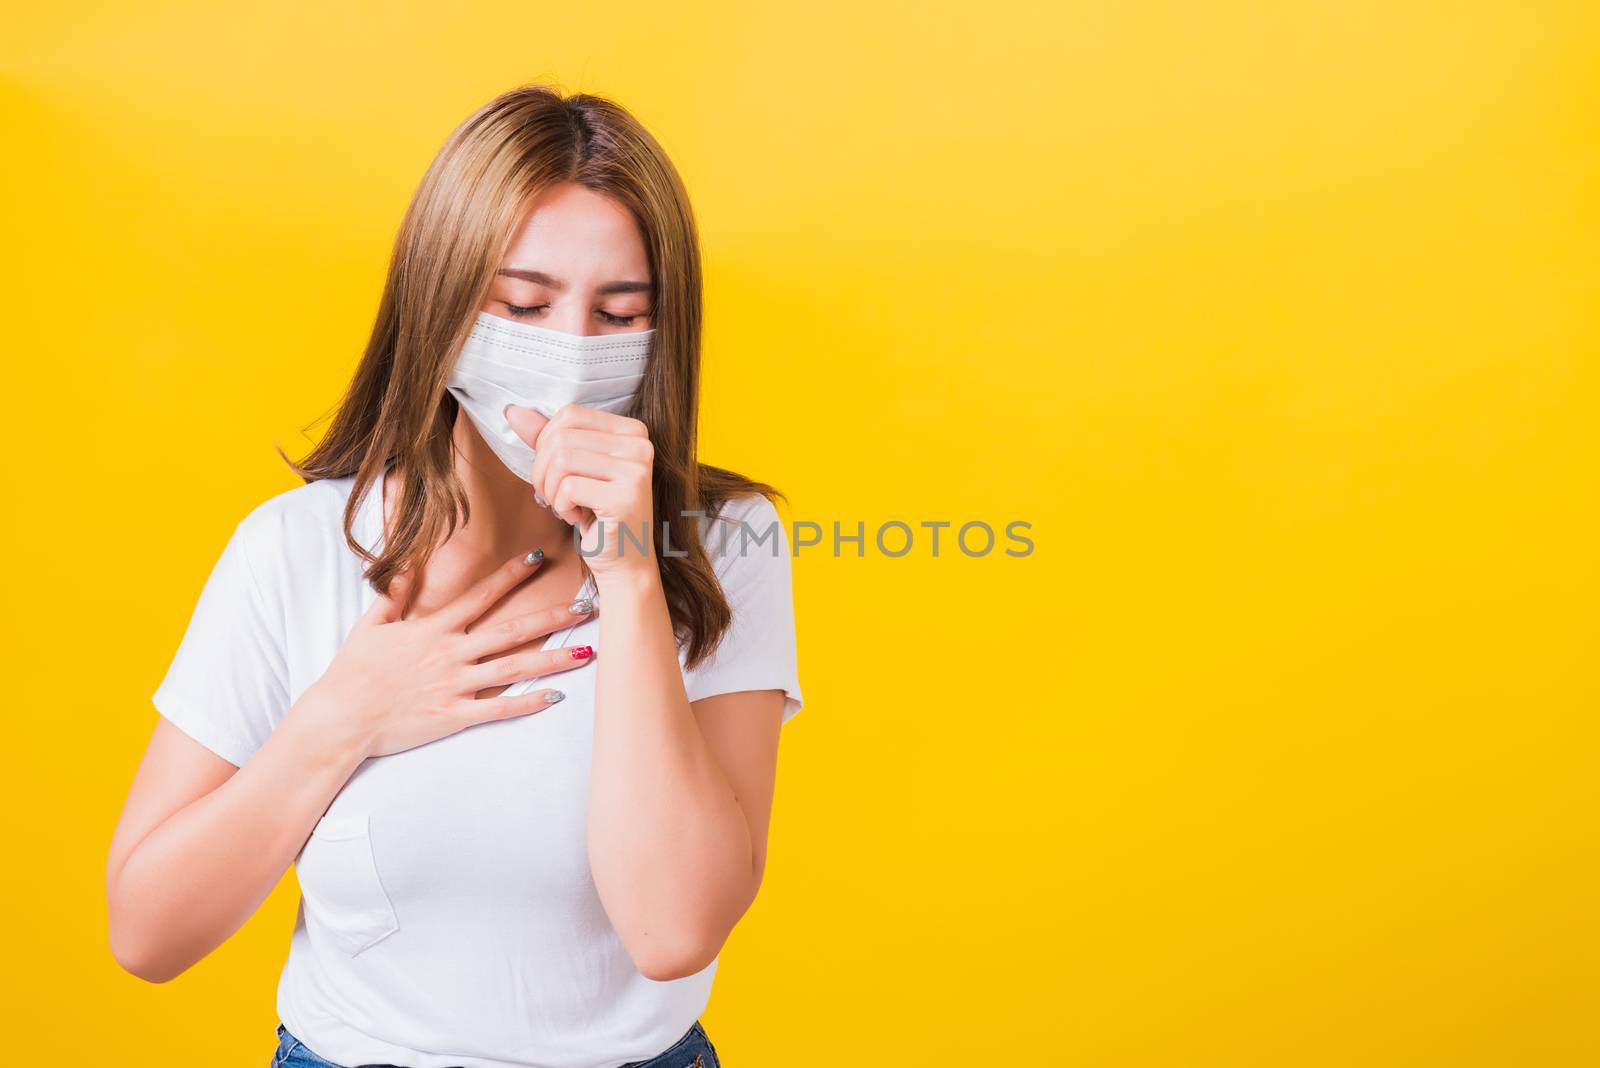 Asian portrait beautiful cute young woman standing wear t-shirt cough in mask protection from COVID virus epidemic or air pollution isolated, studio shot on yellow background with copy space